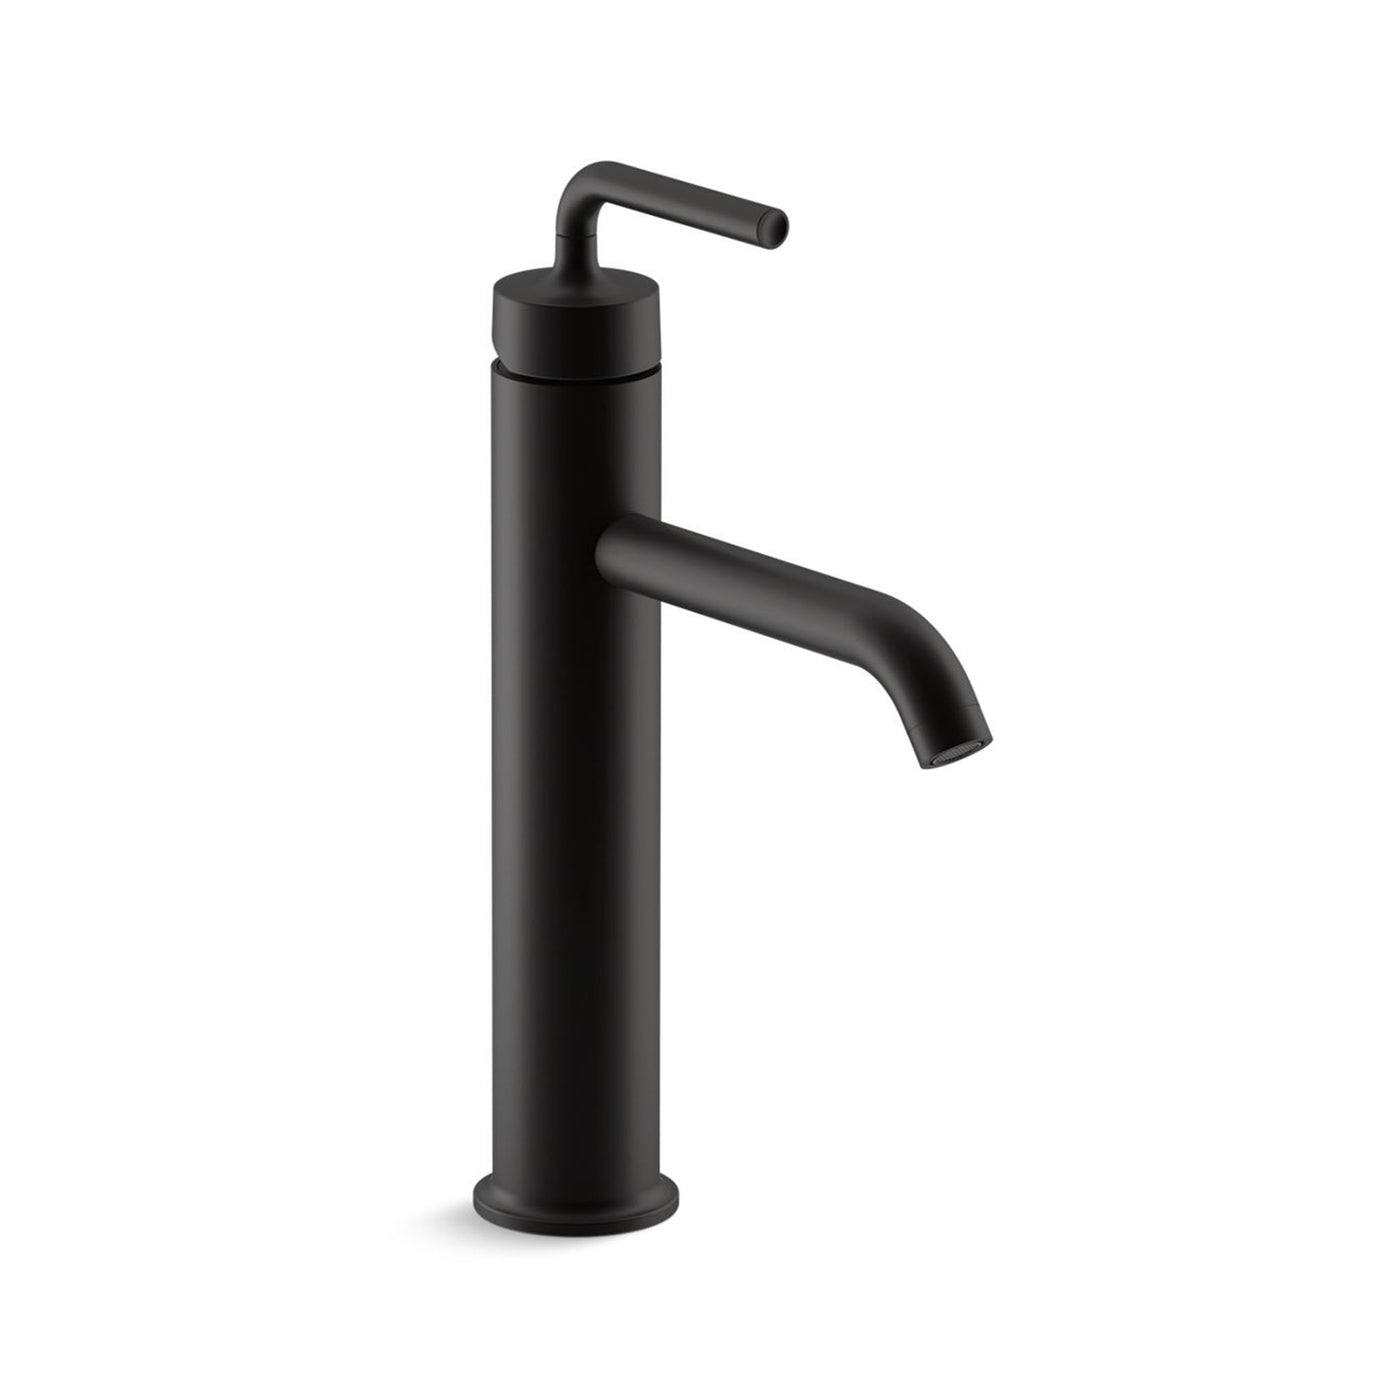 Purist® Tall single-handle bathroom sink faucet with lever handle, 1.2 gpm